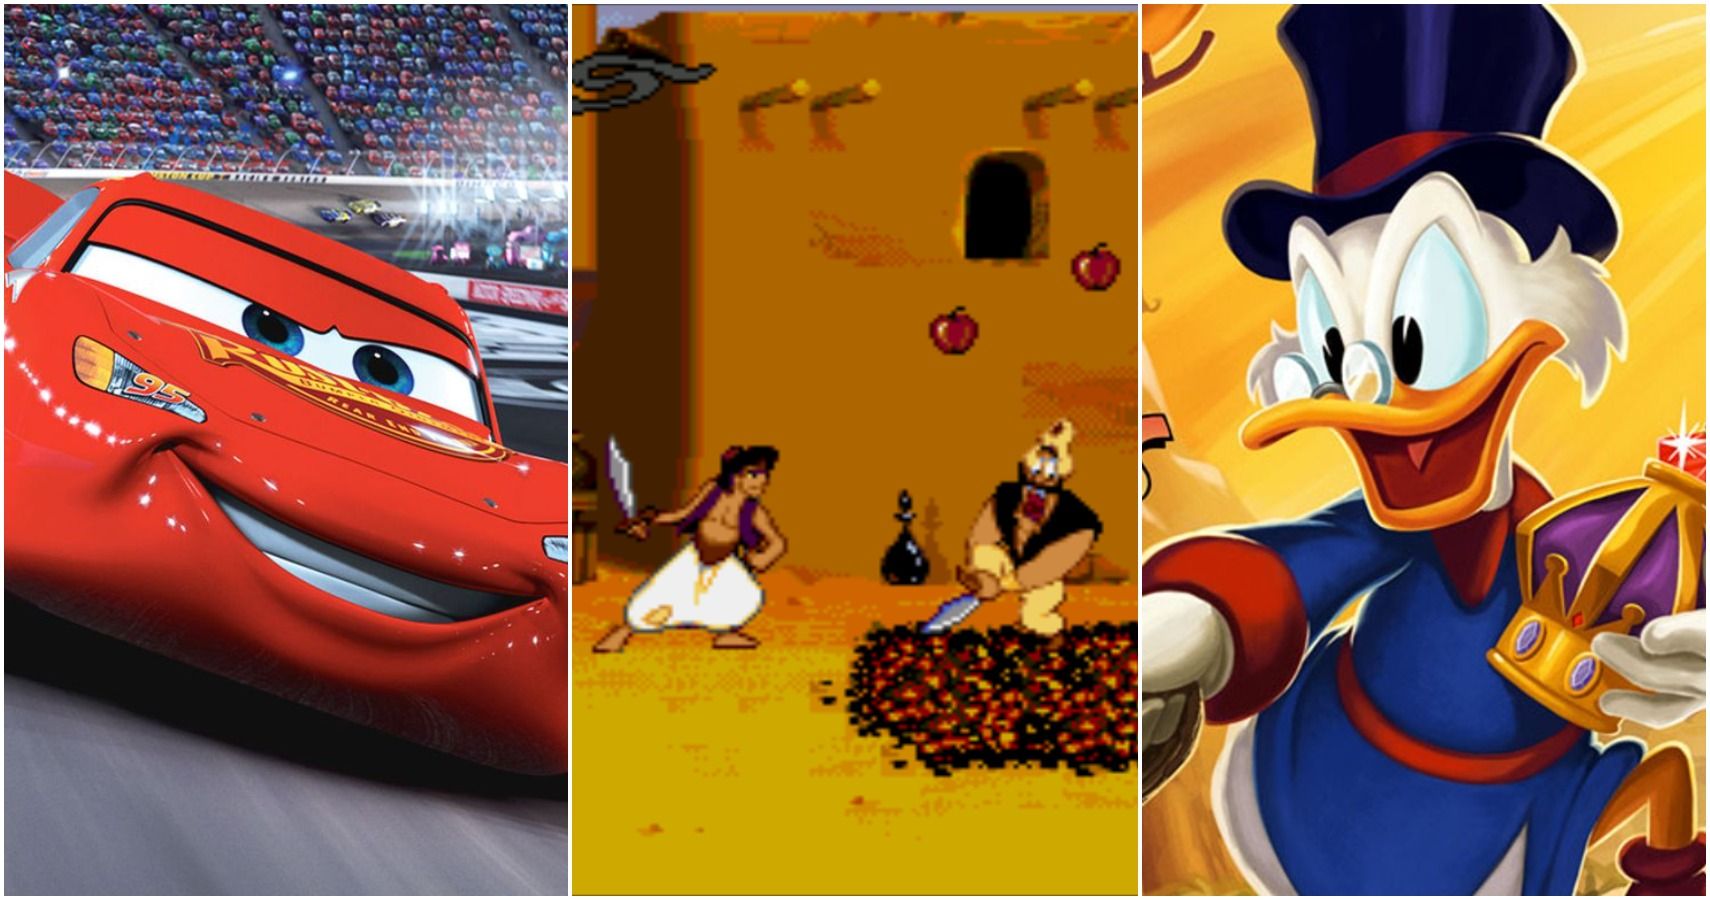 5 Disney Animated Movies That Would Make Awesome Games (& 5 You Play